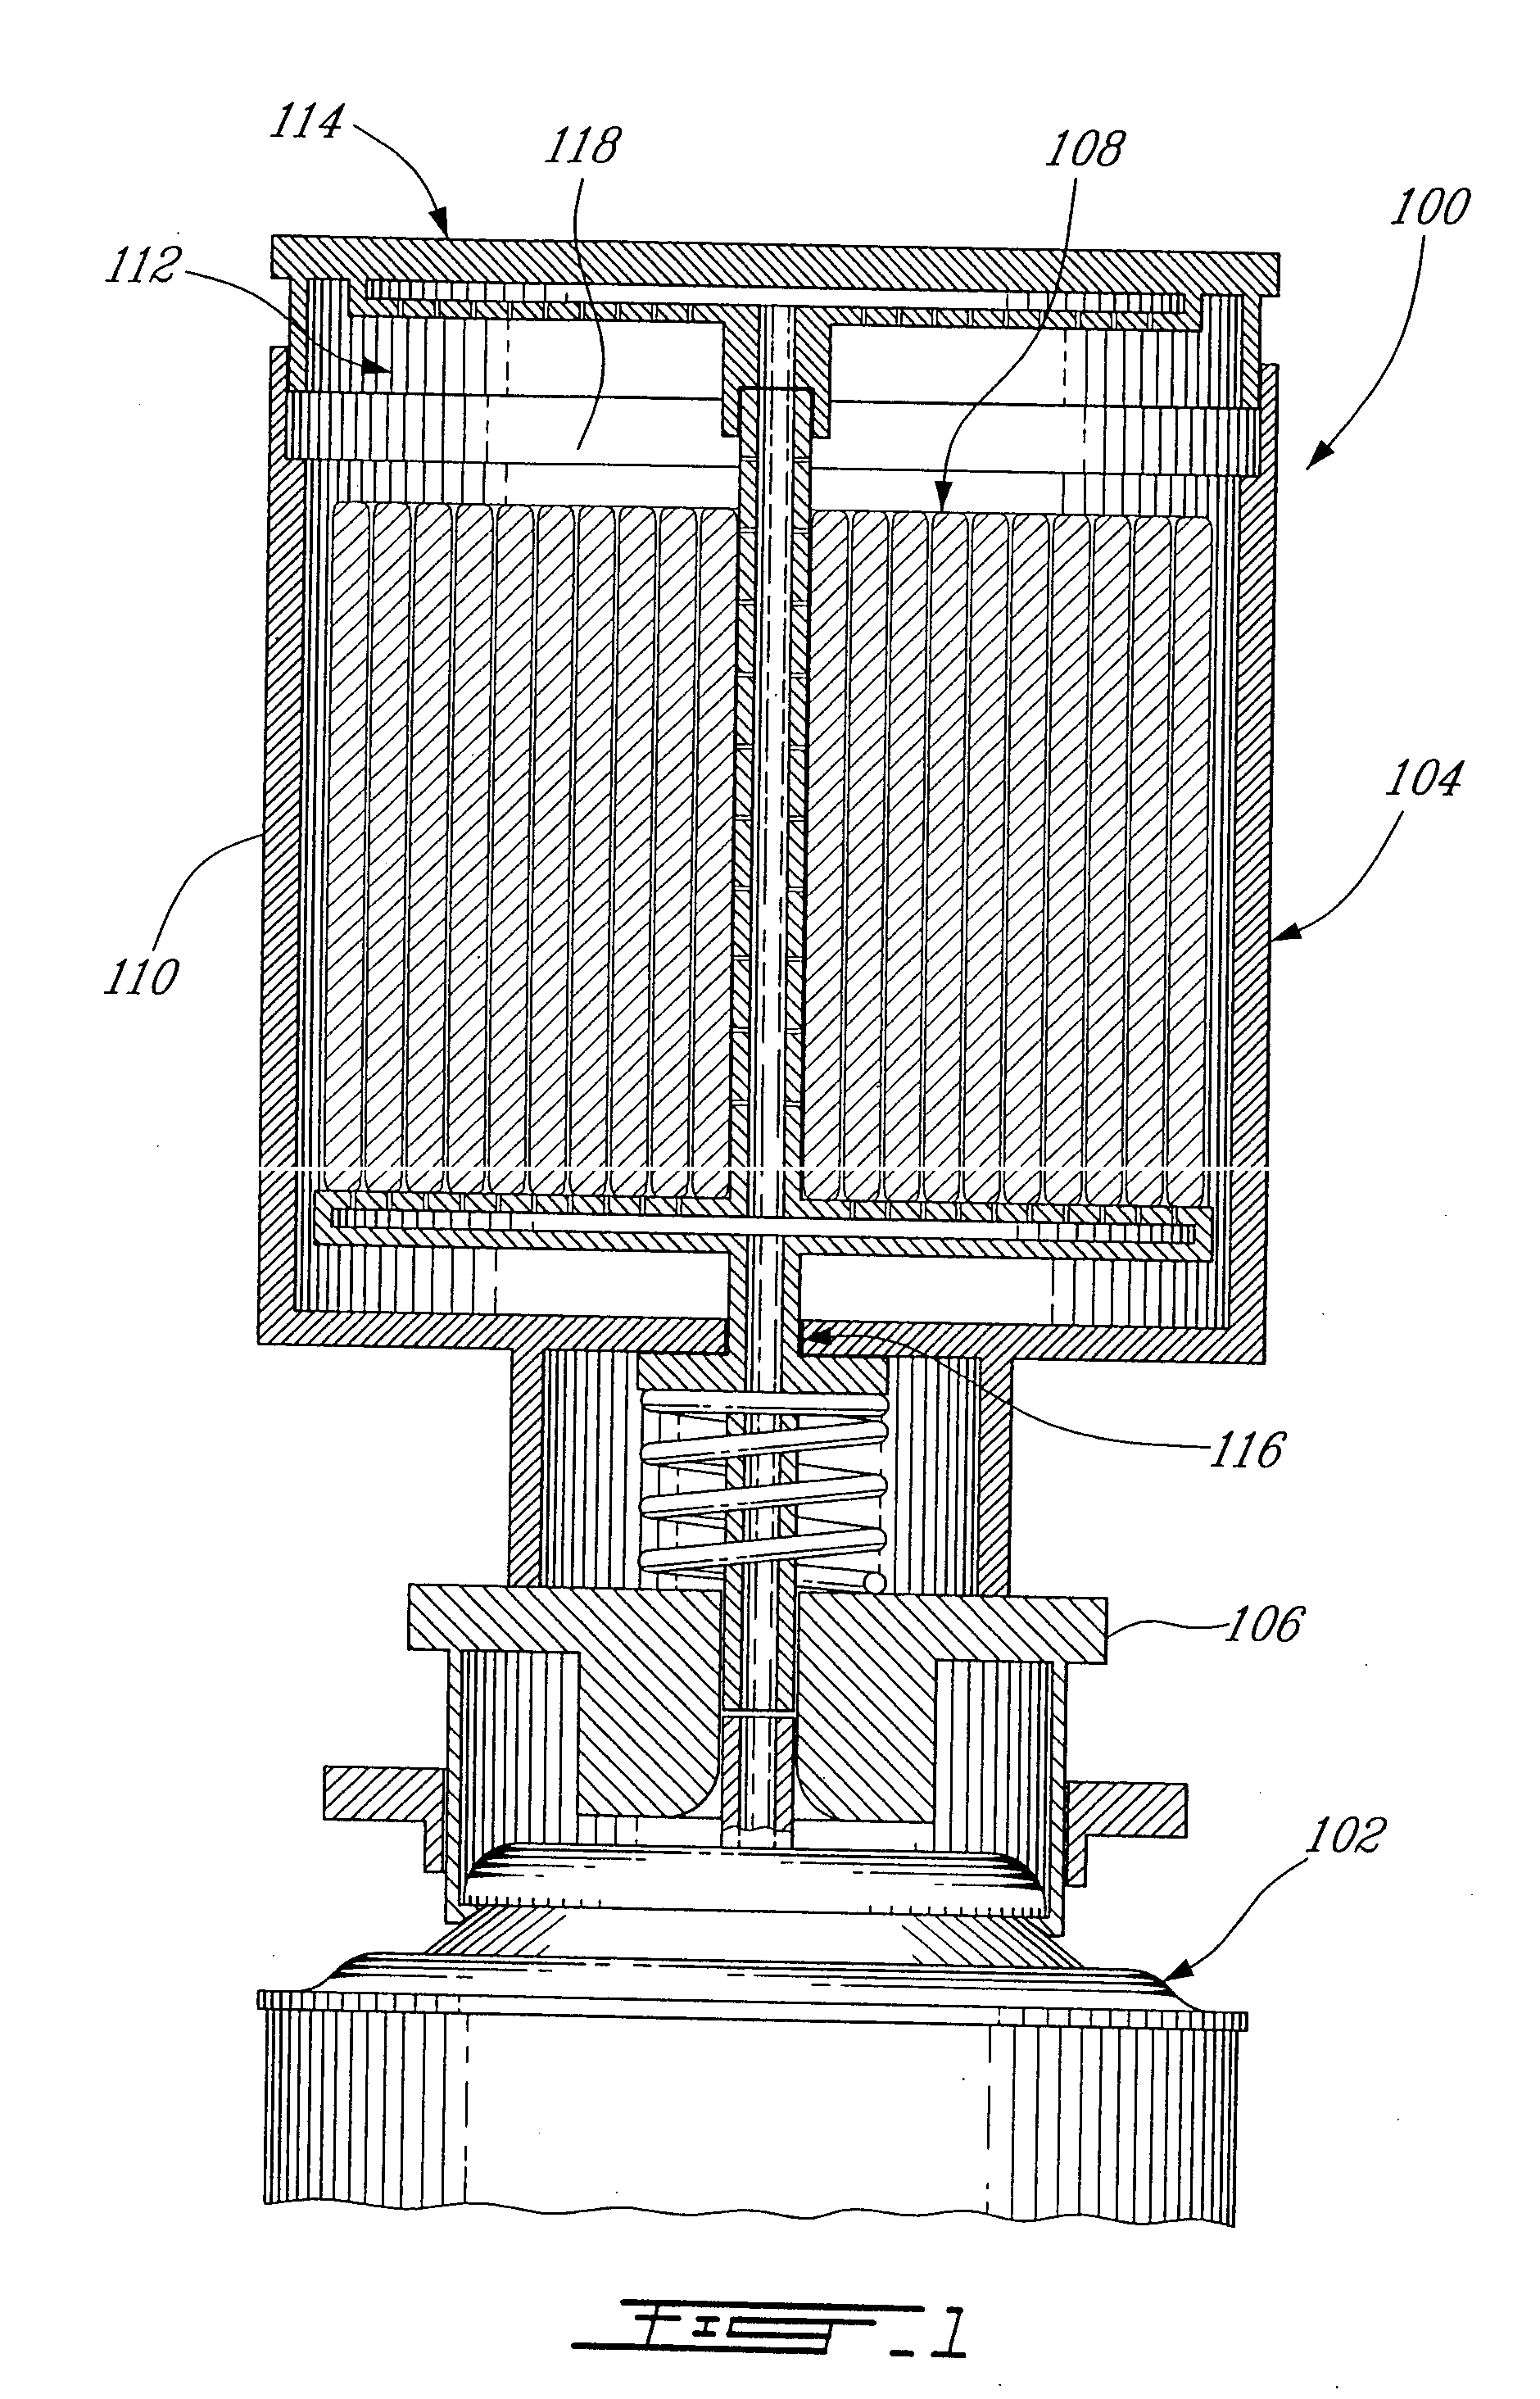 Bandage cooling apparatus and method of using same